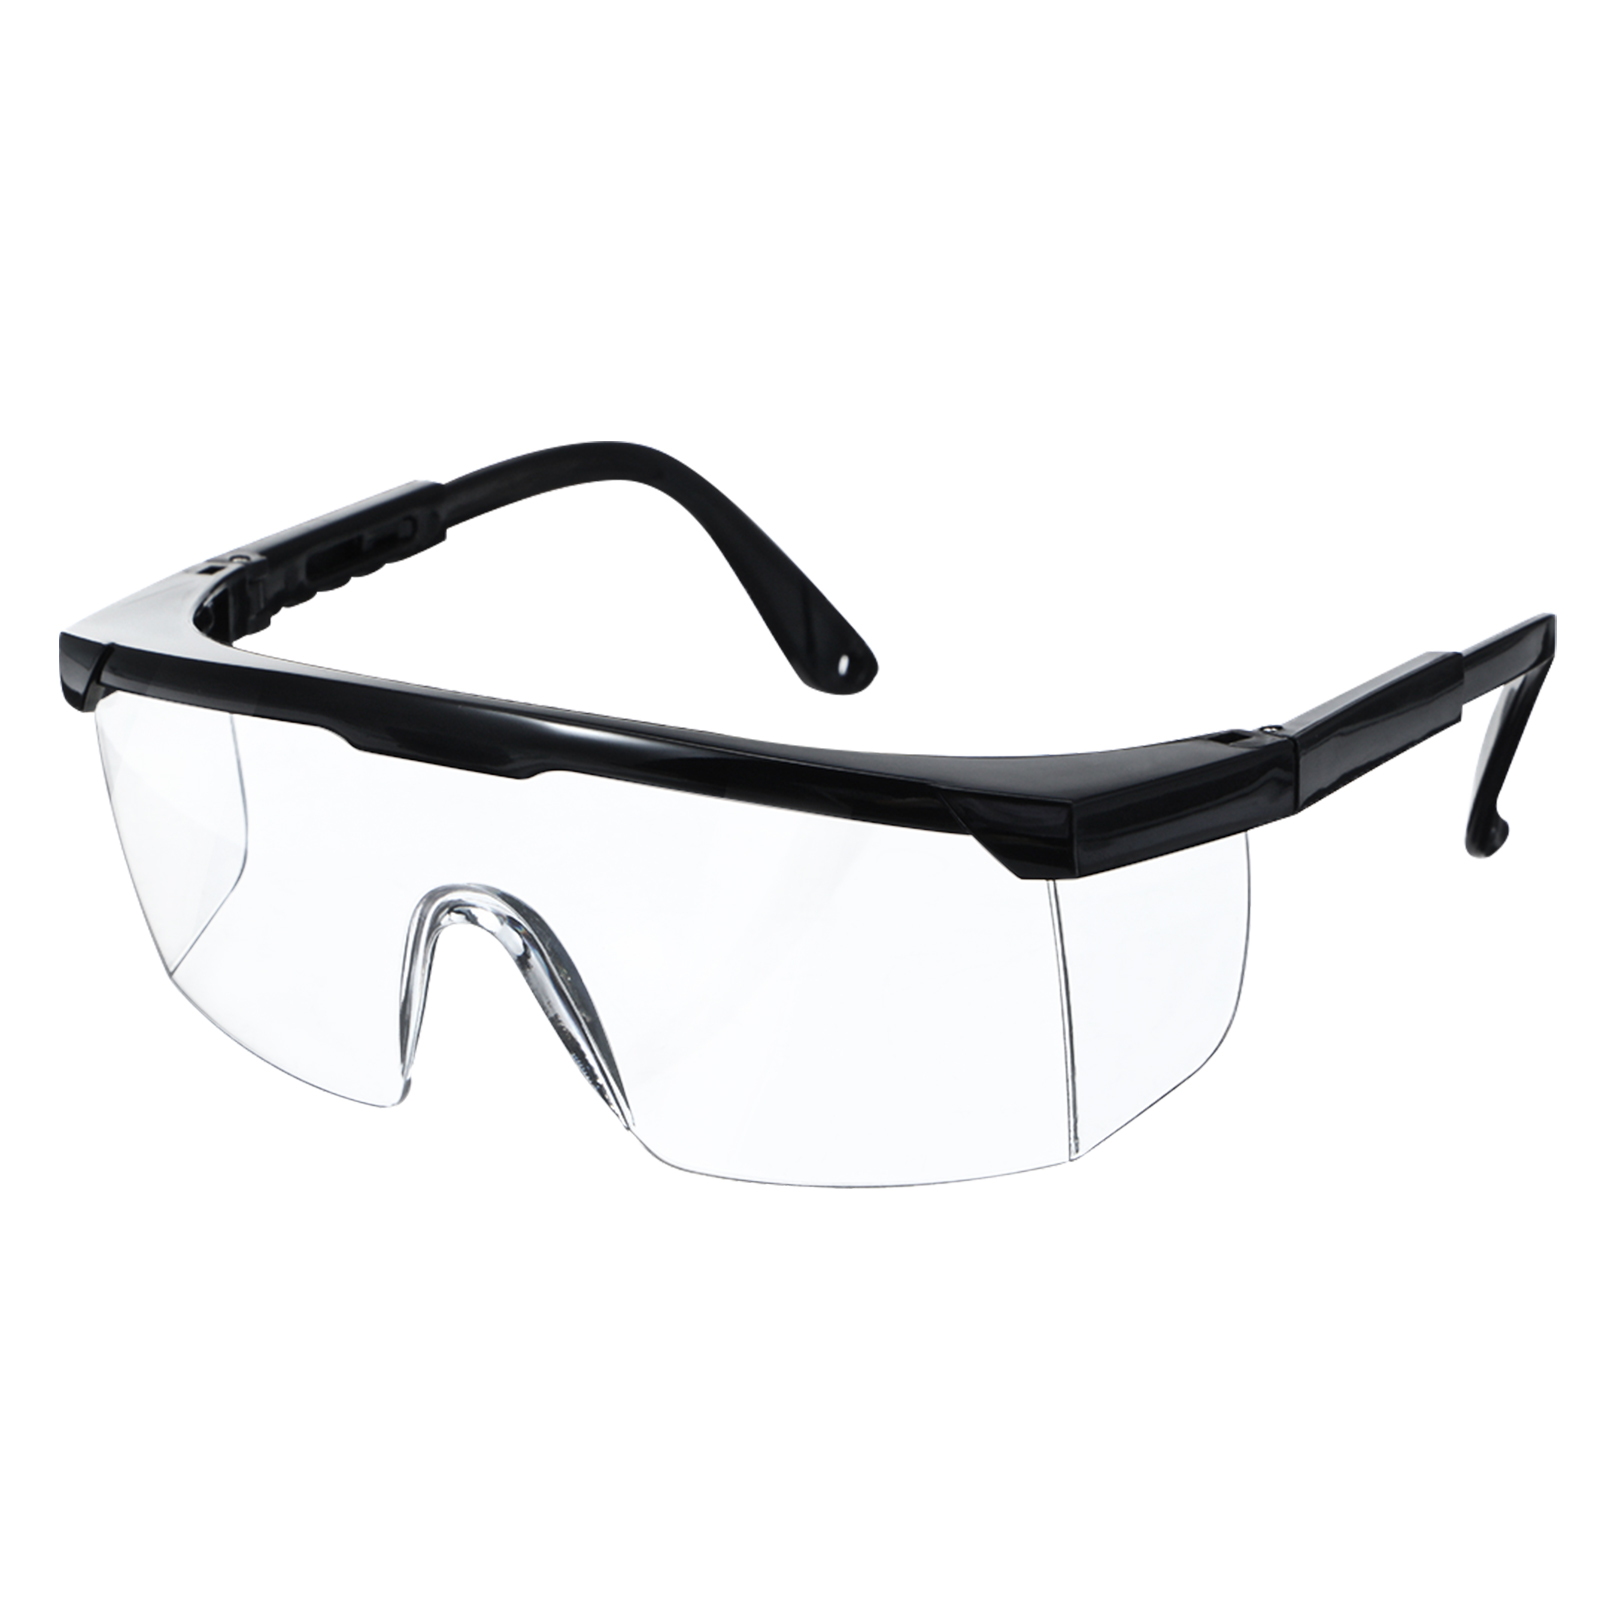 1PCS-Safety-Glasses-Work-Goggles-Eyewear-Protective-Industrial-Lab-Dust-Droplets-1889895-8